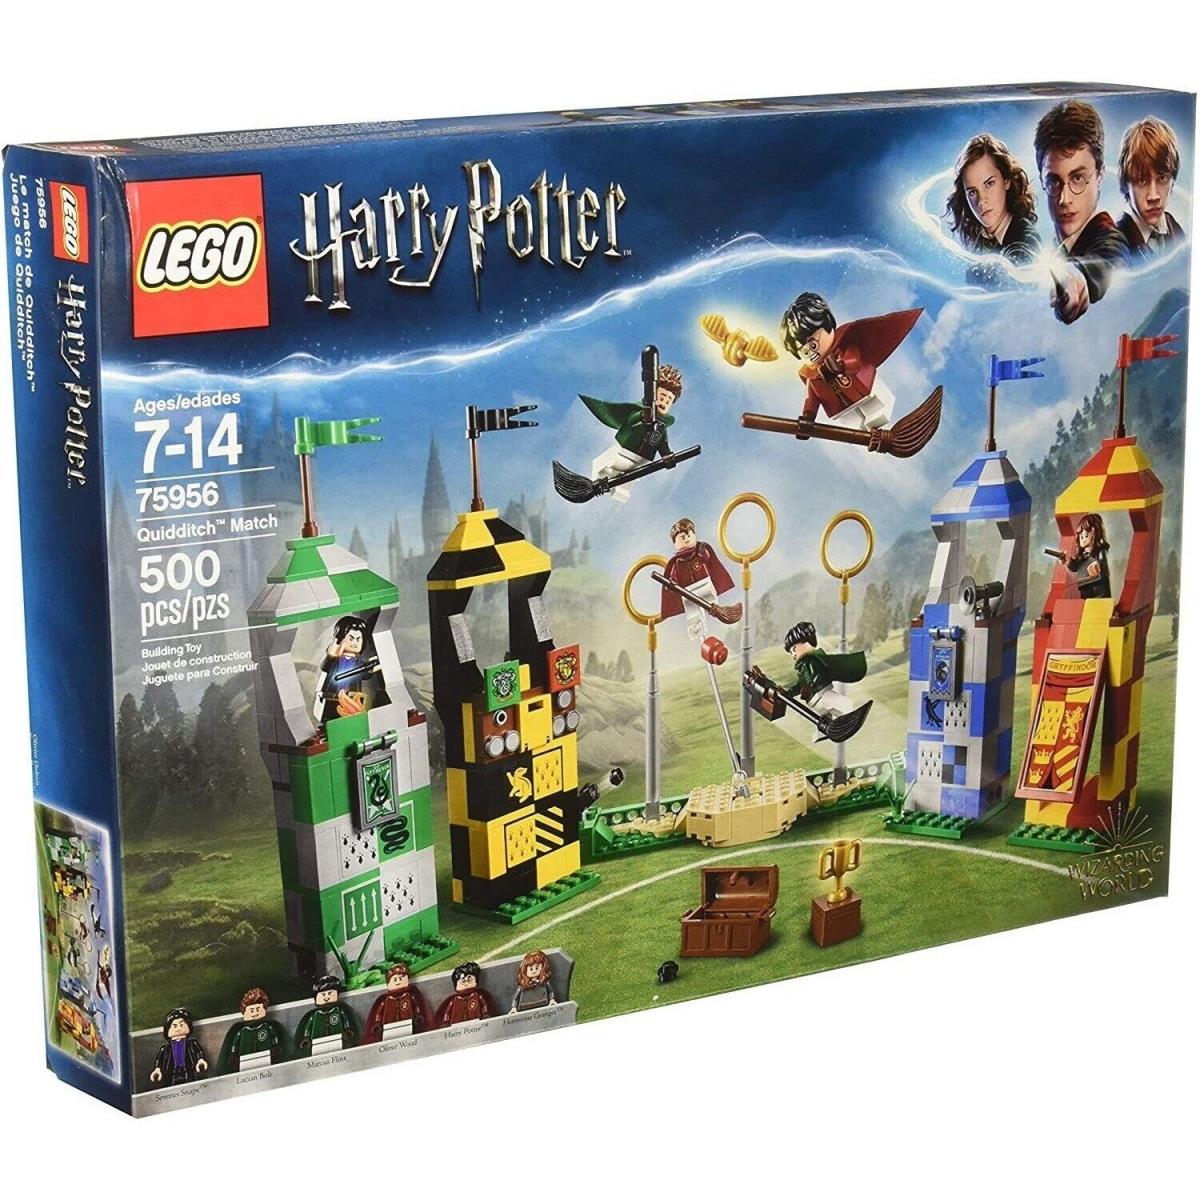 Lego Harry Potter Quidditch Match 75956 Retired Set 500 Pieces